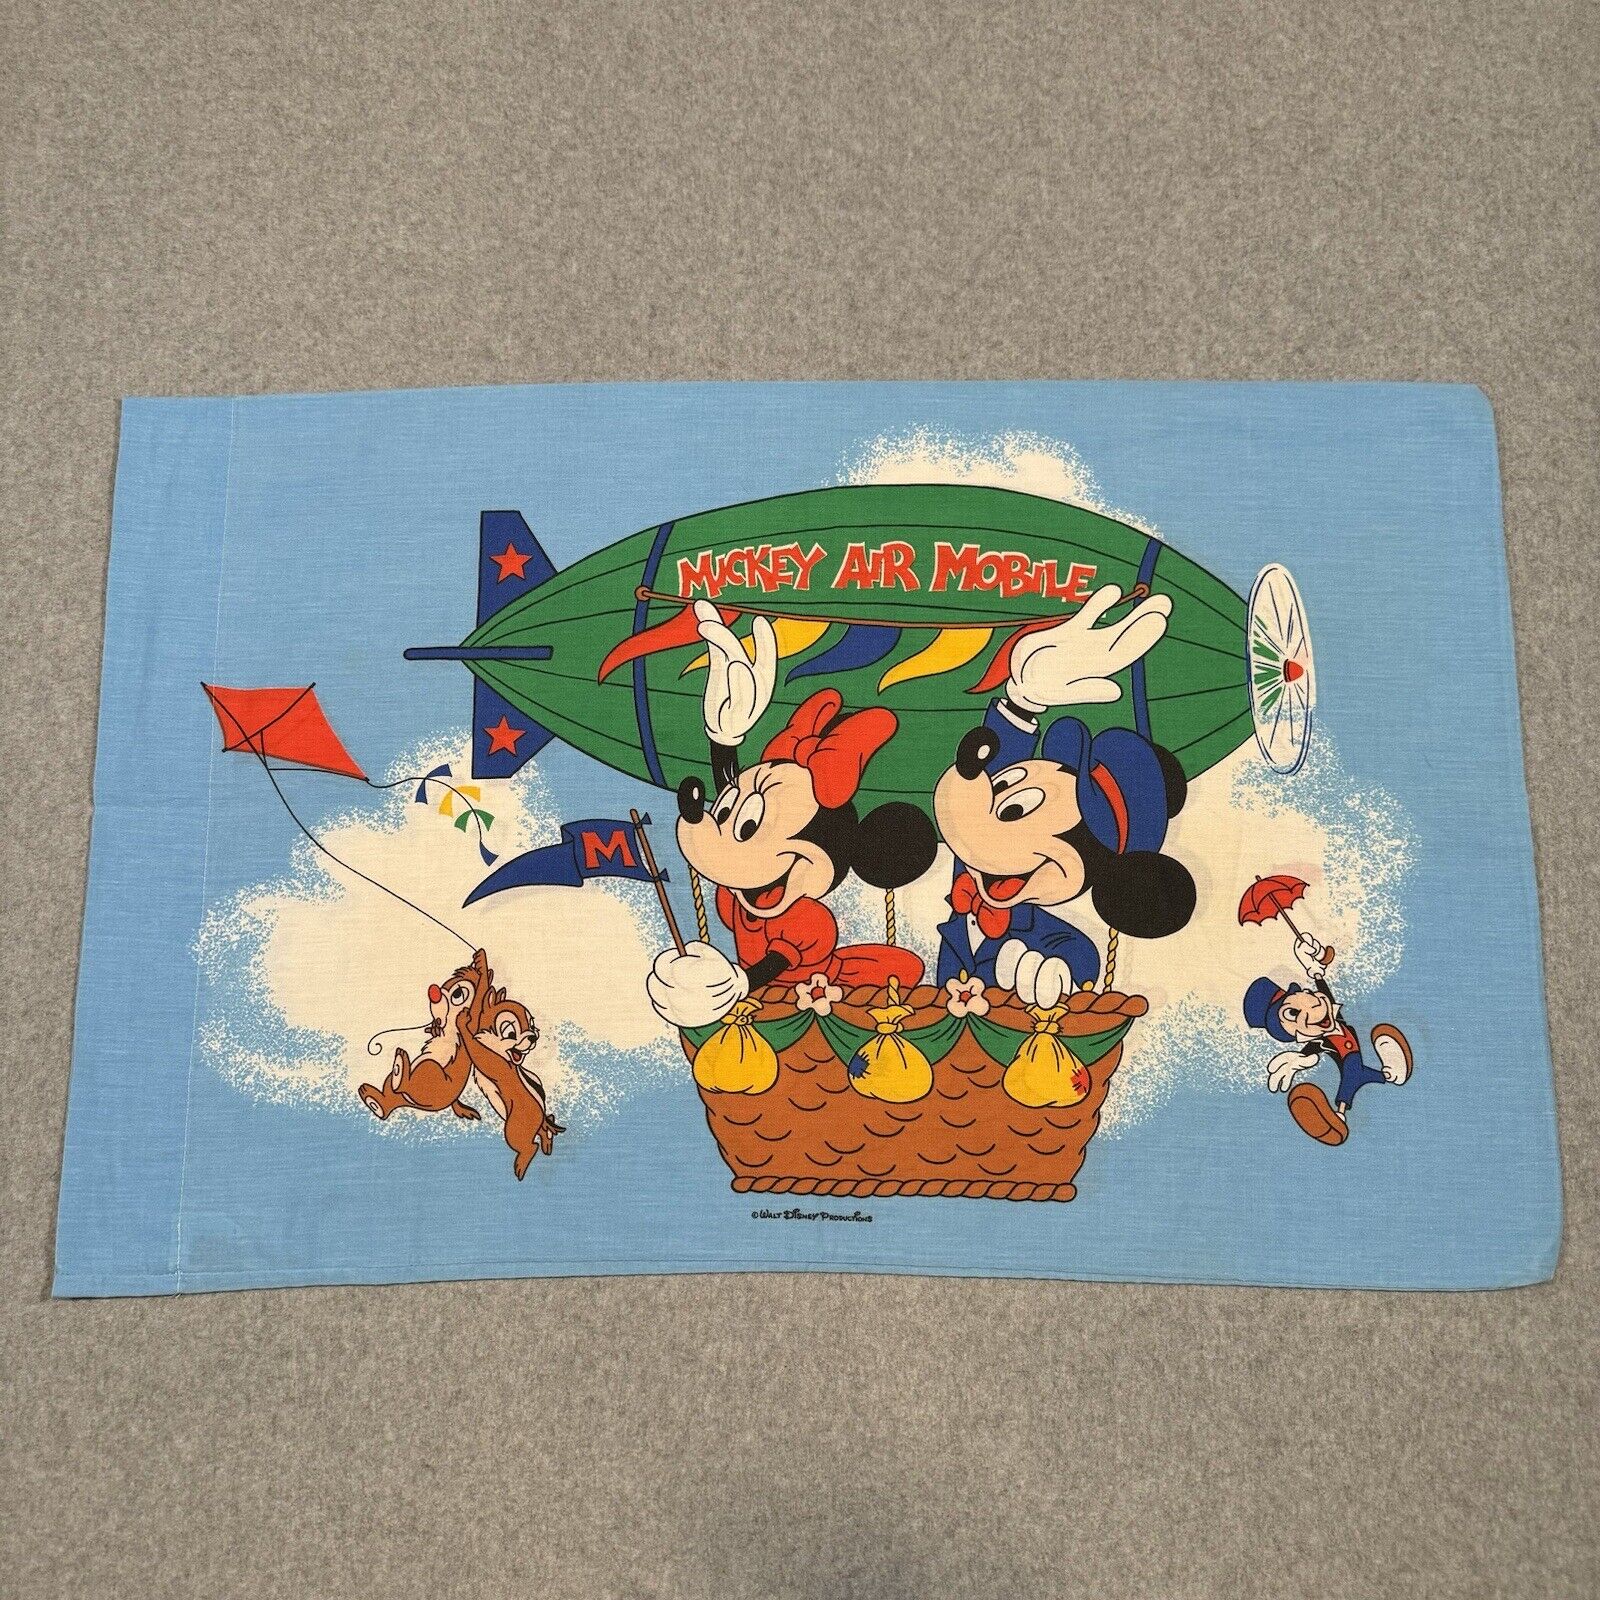 Vintage Disney Mickey Air Mobile Minnie Mouse Standard Pillow Case 80s 90s